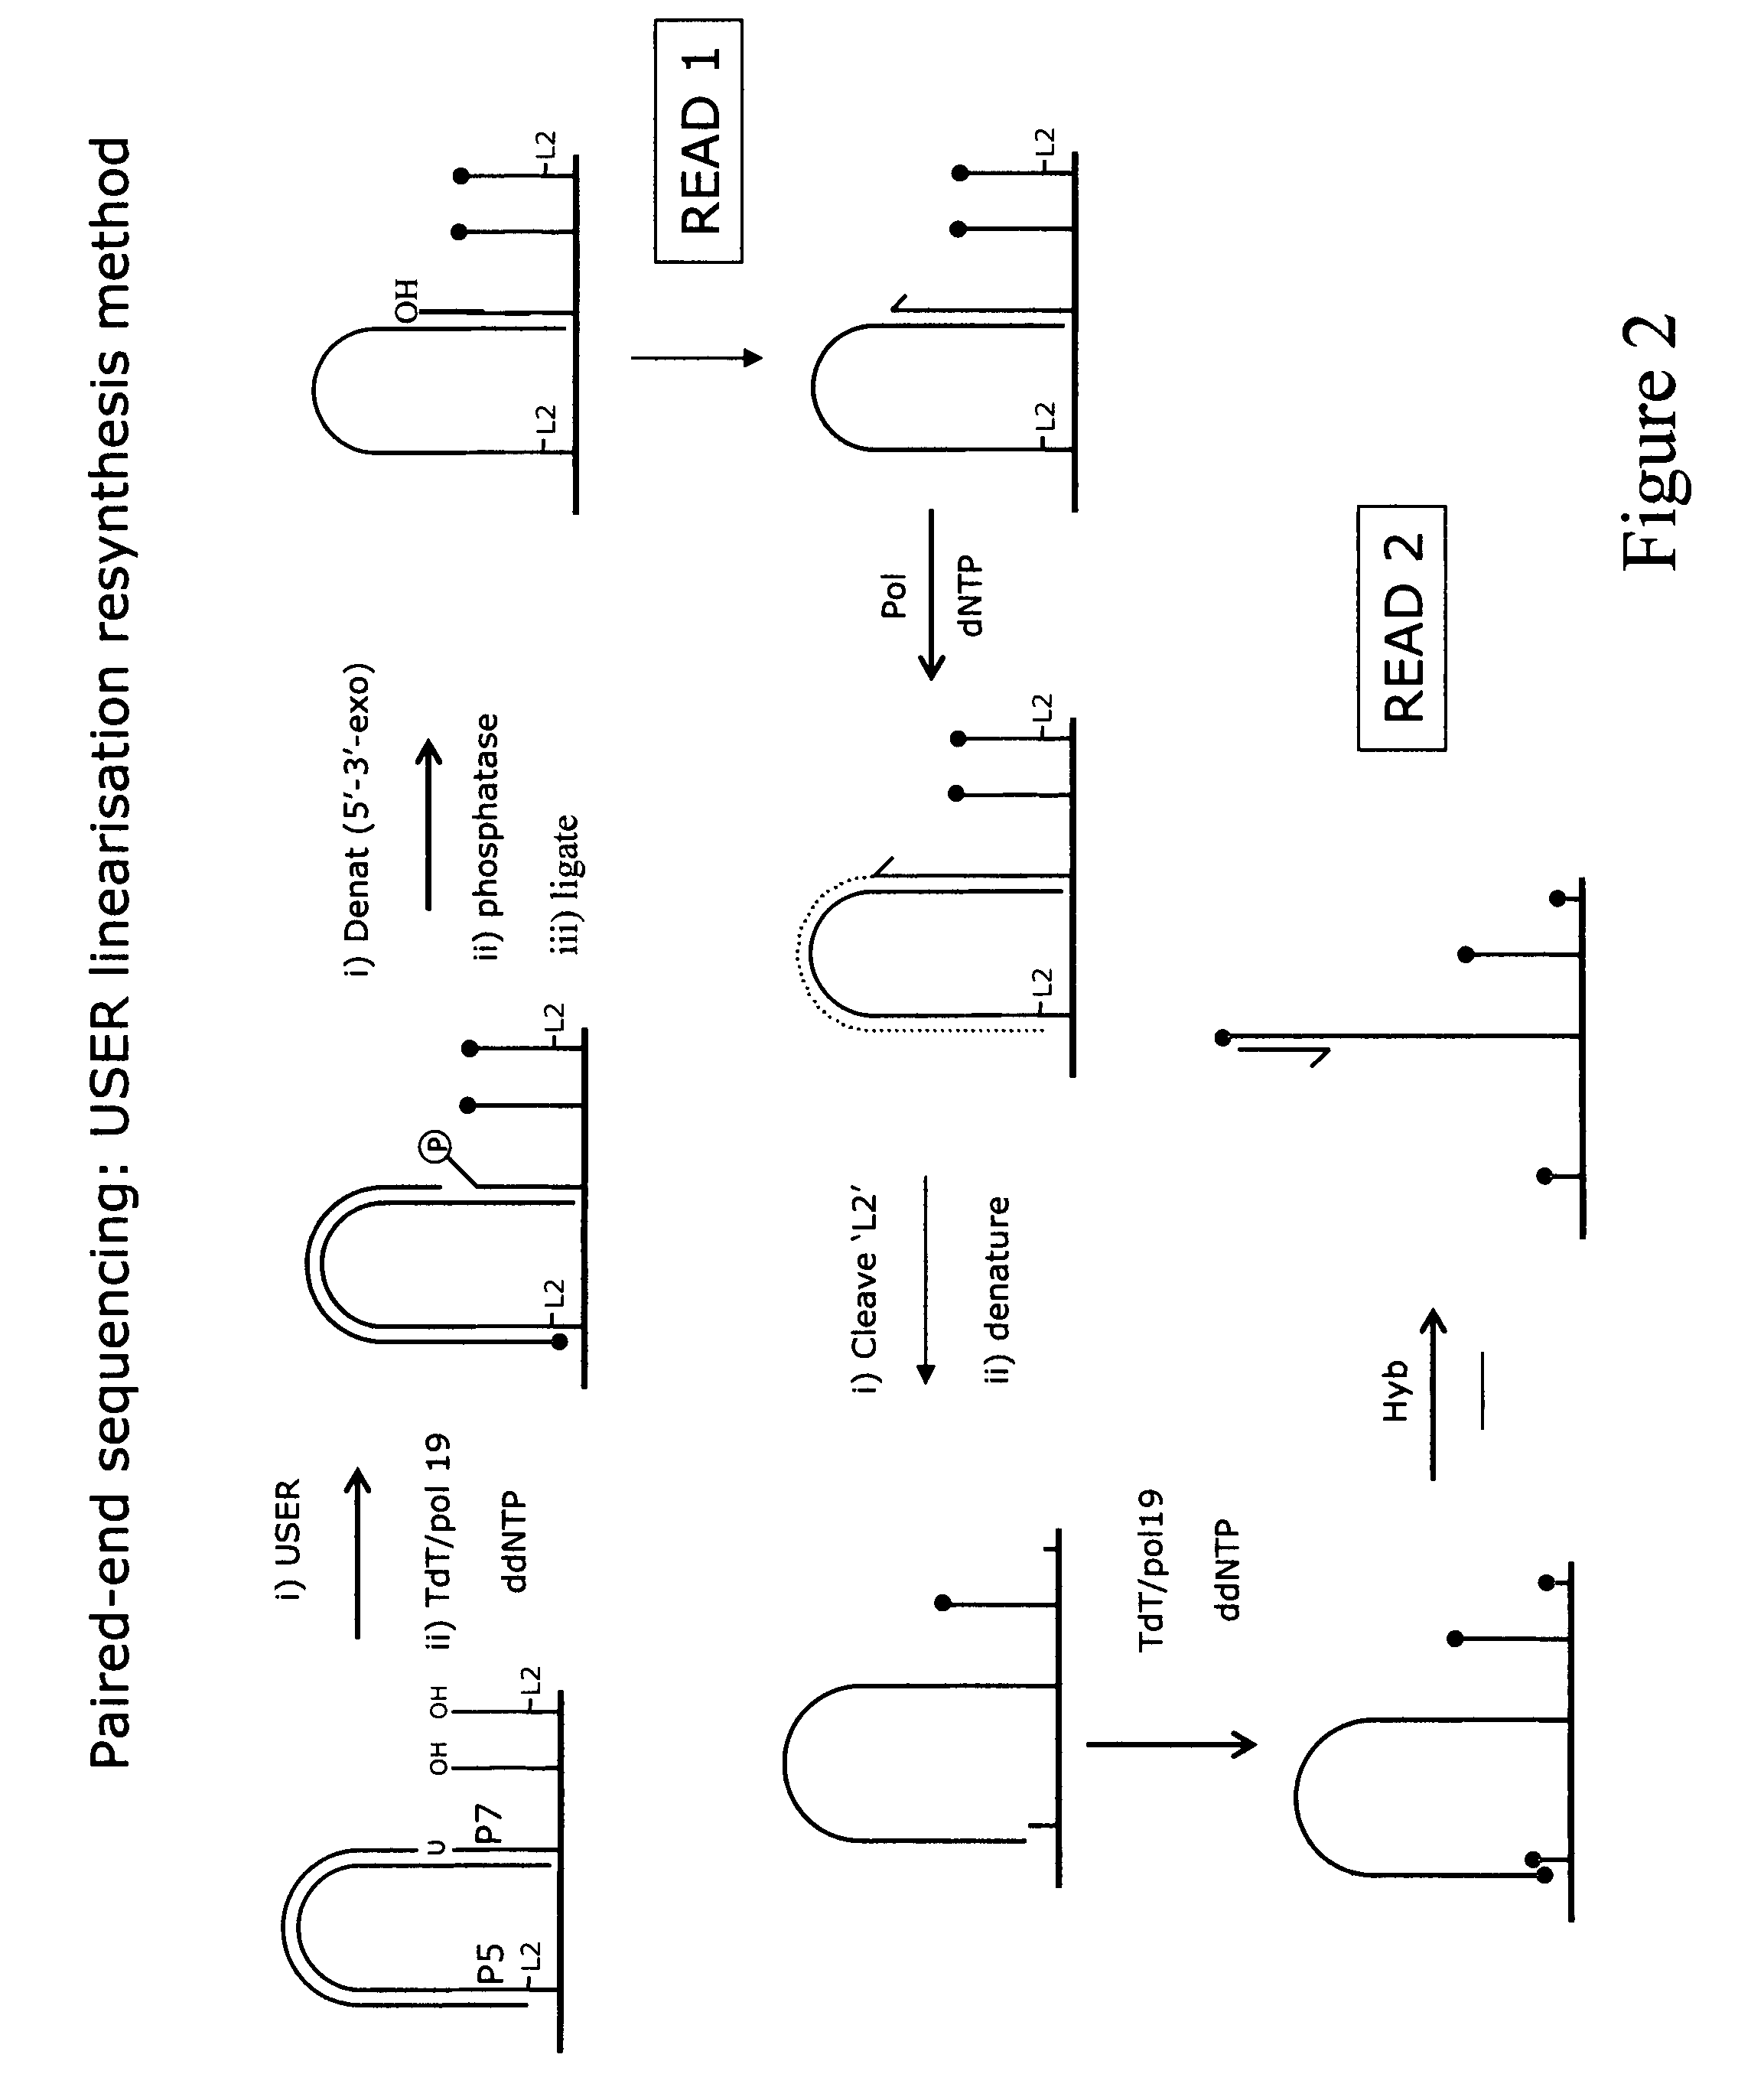 Method for pair-wise sequencing a plurity of target polynucleotides